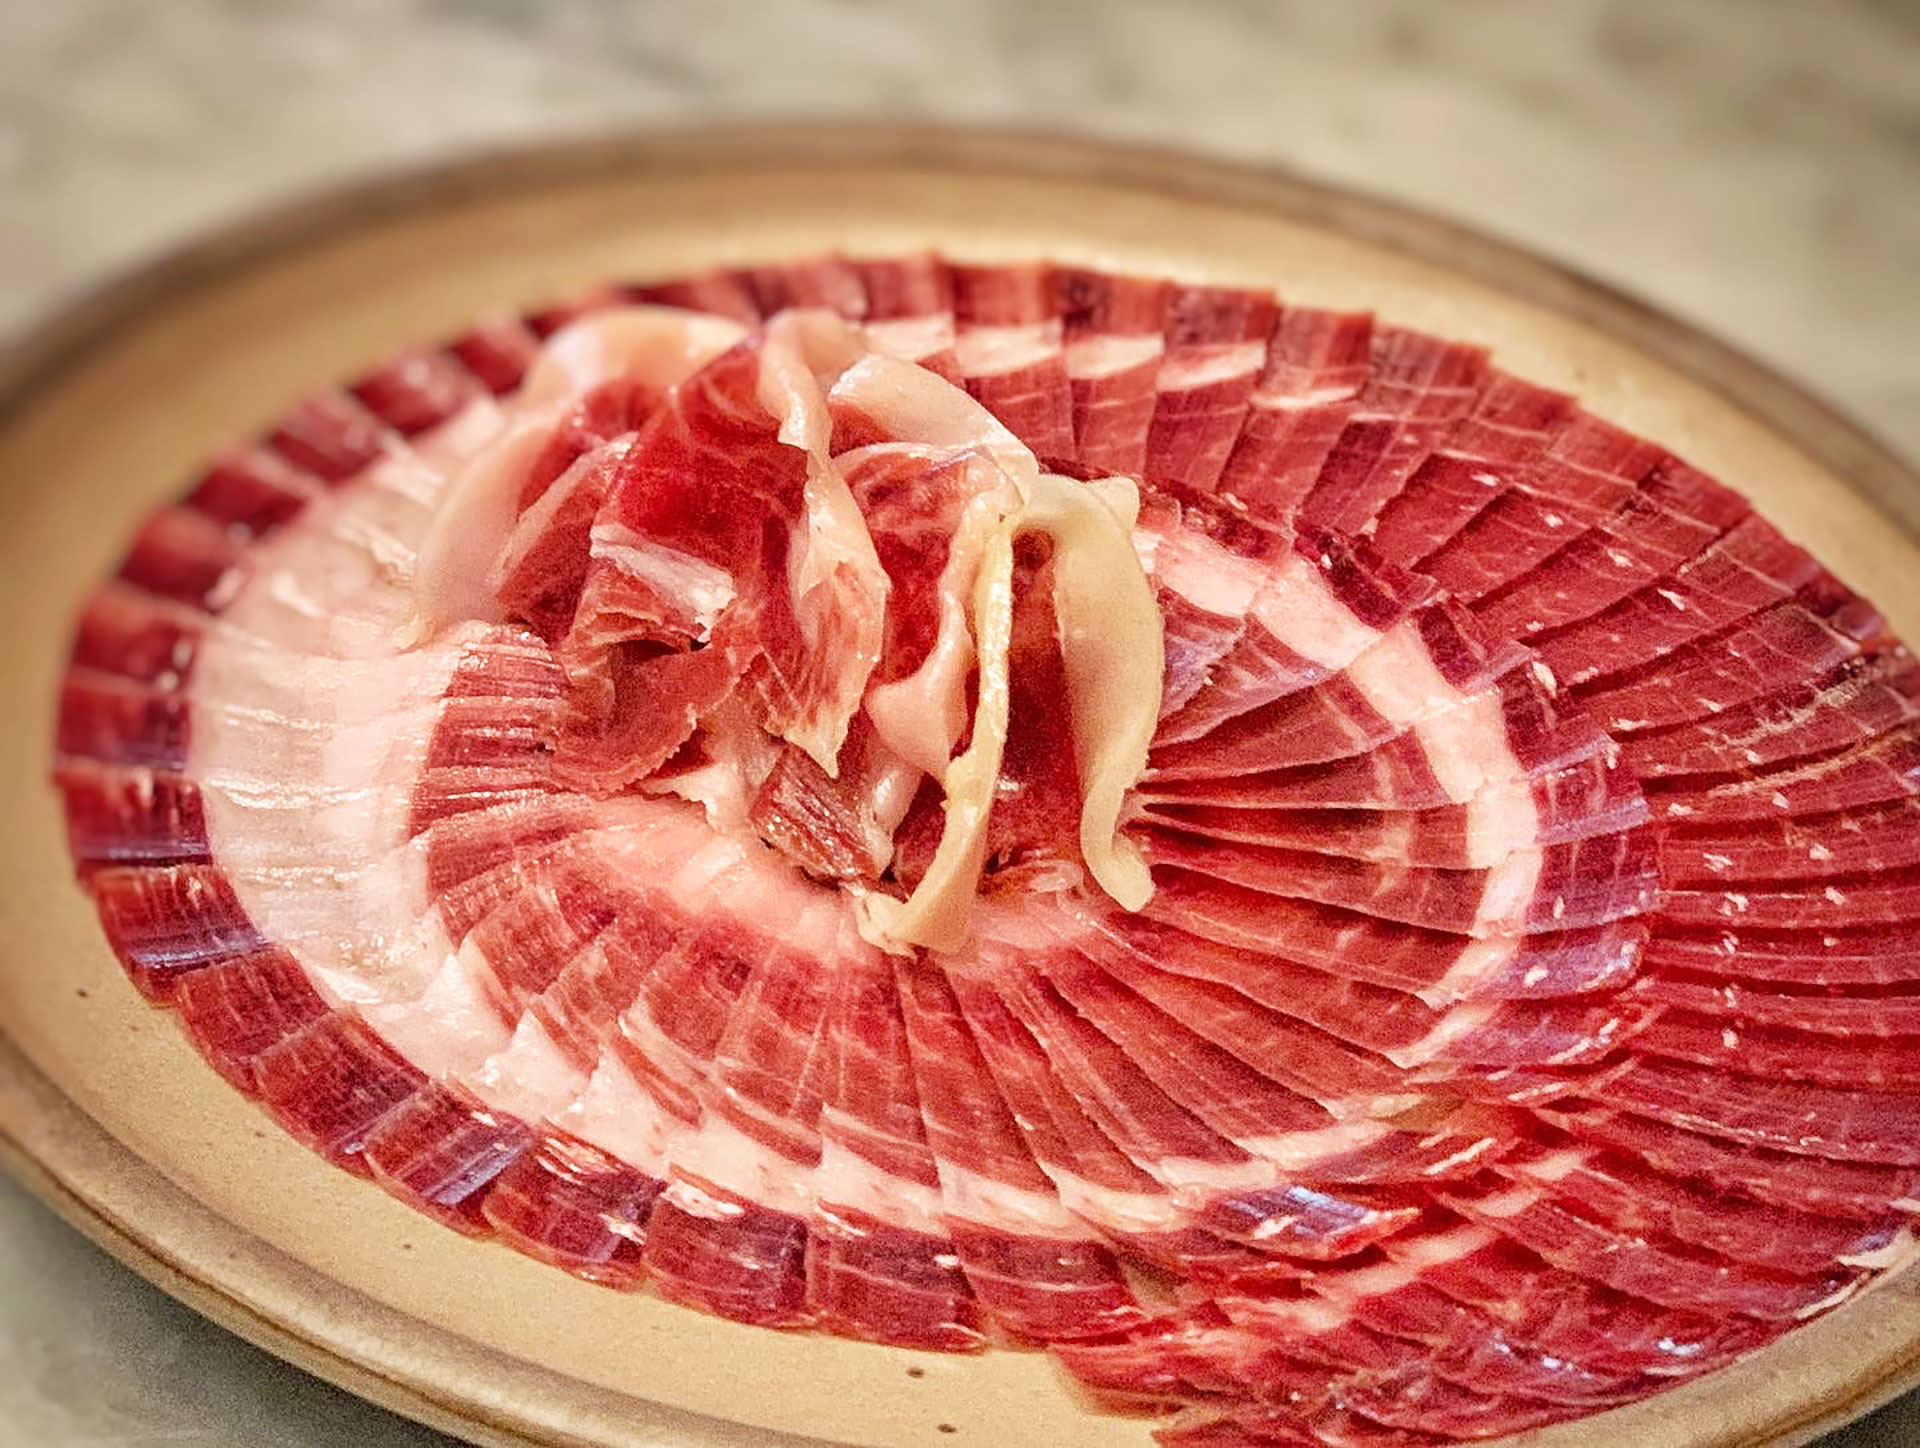 Jamon iberico from Salamanca, one of the world most precious delicacies